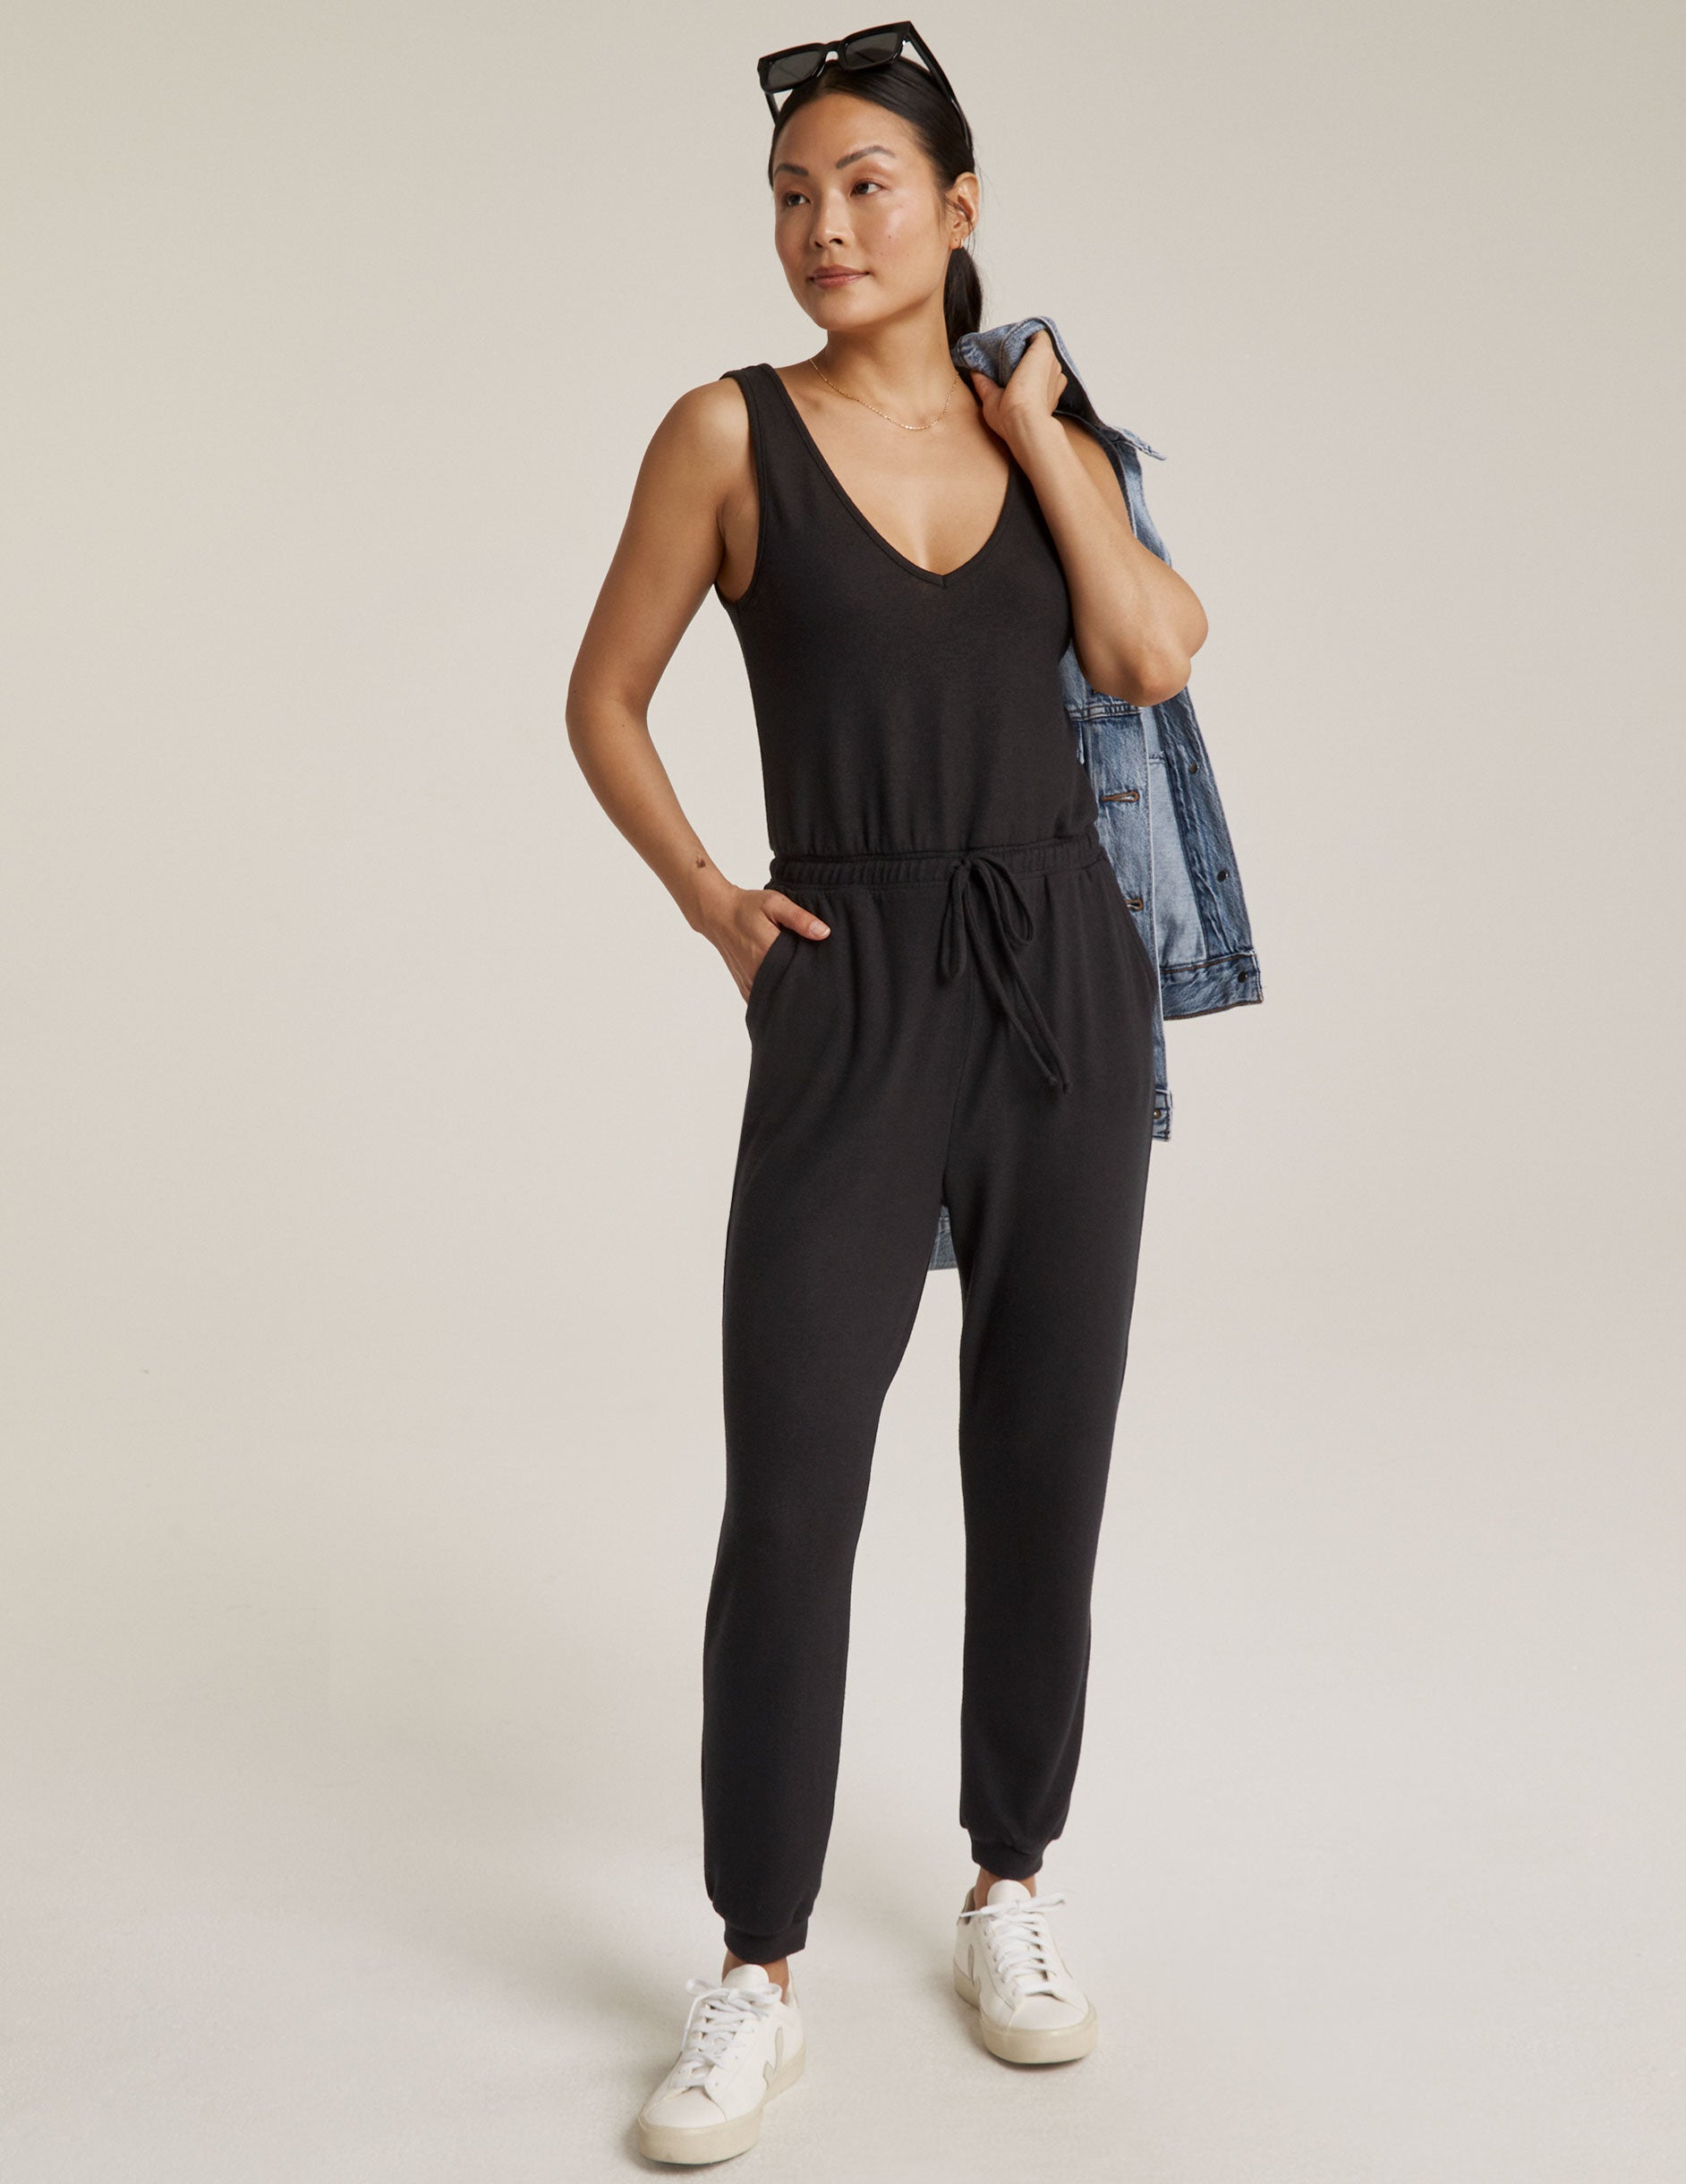 black jumpsuit with drawstring at waist